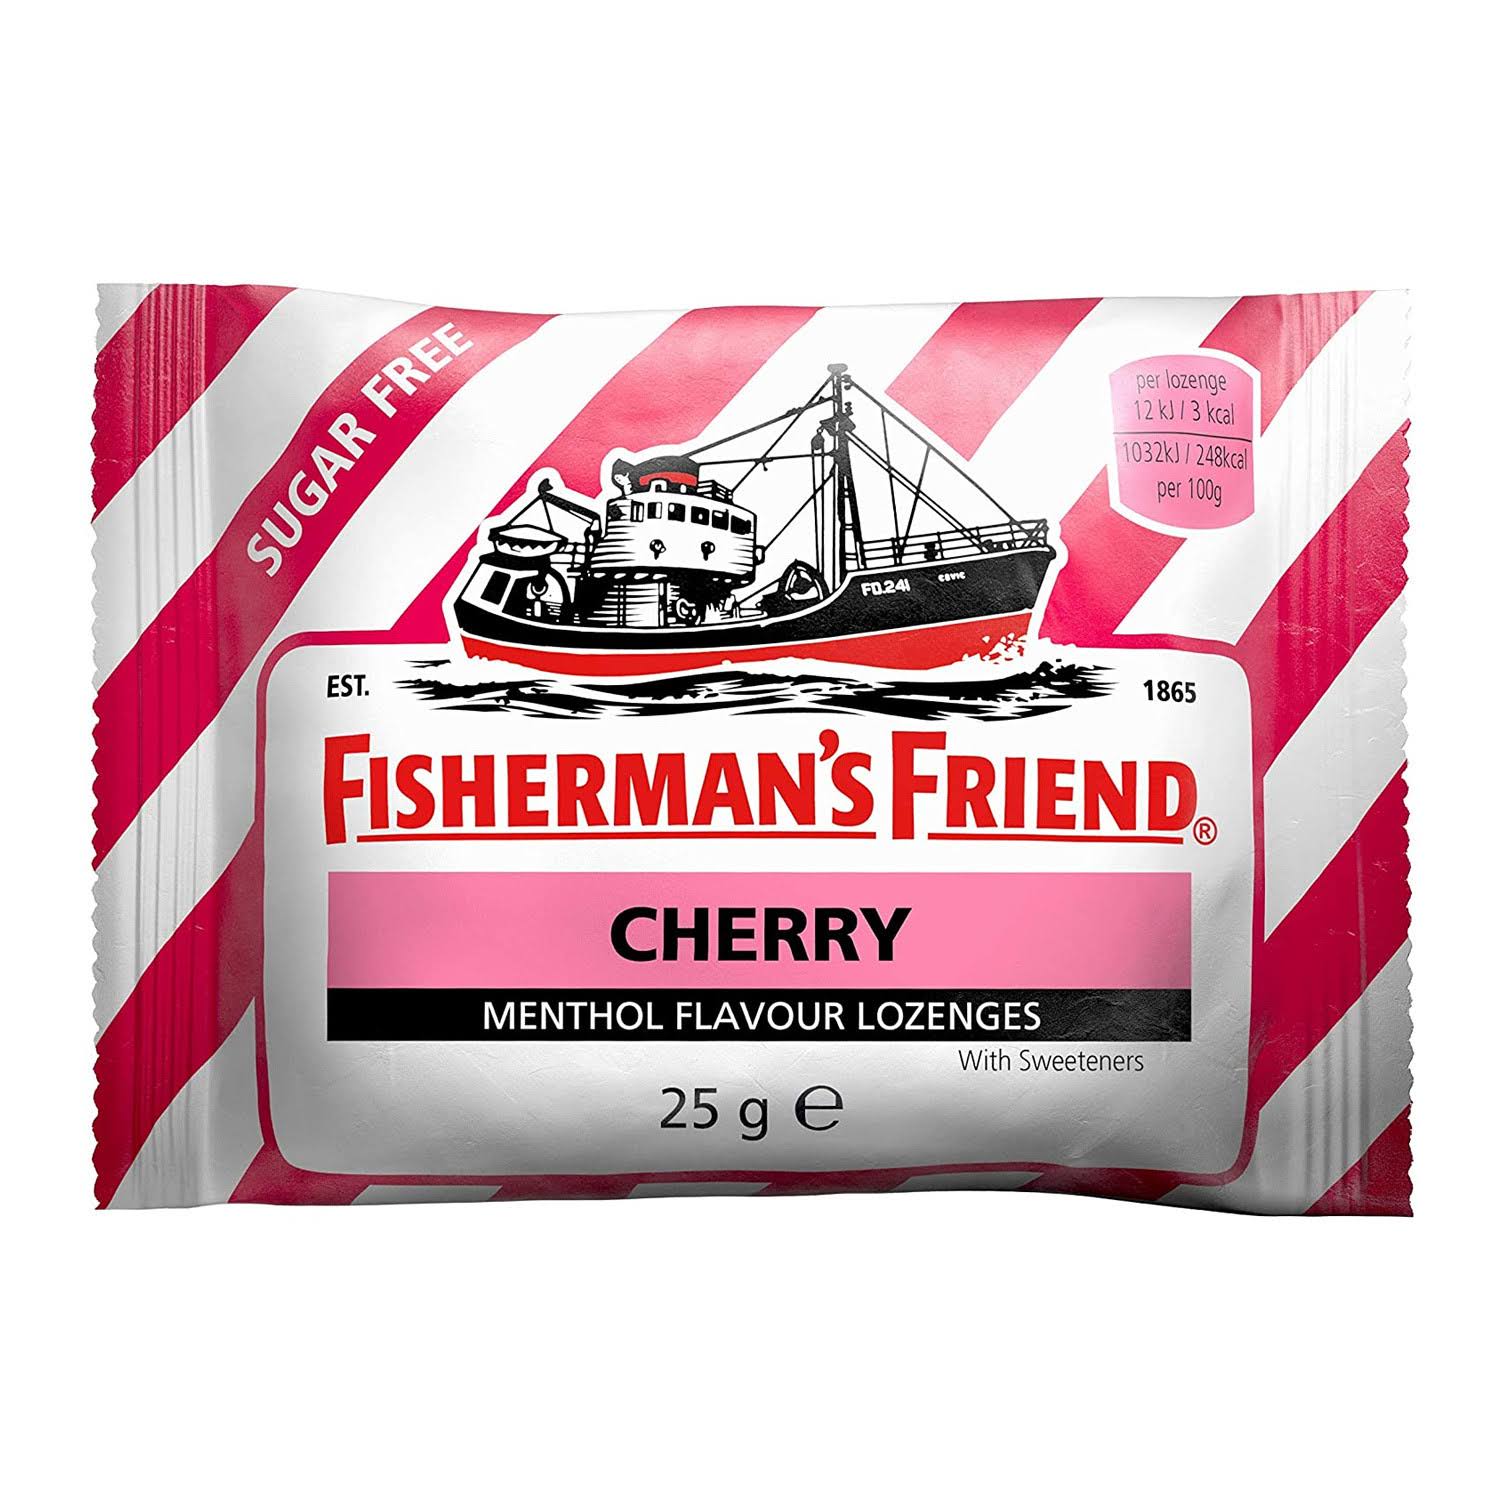 Fisherman’s Friend Lozenges - Cherry Menthol Flavour ,with Sweeteners, 25g